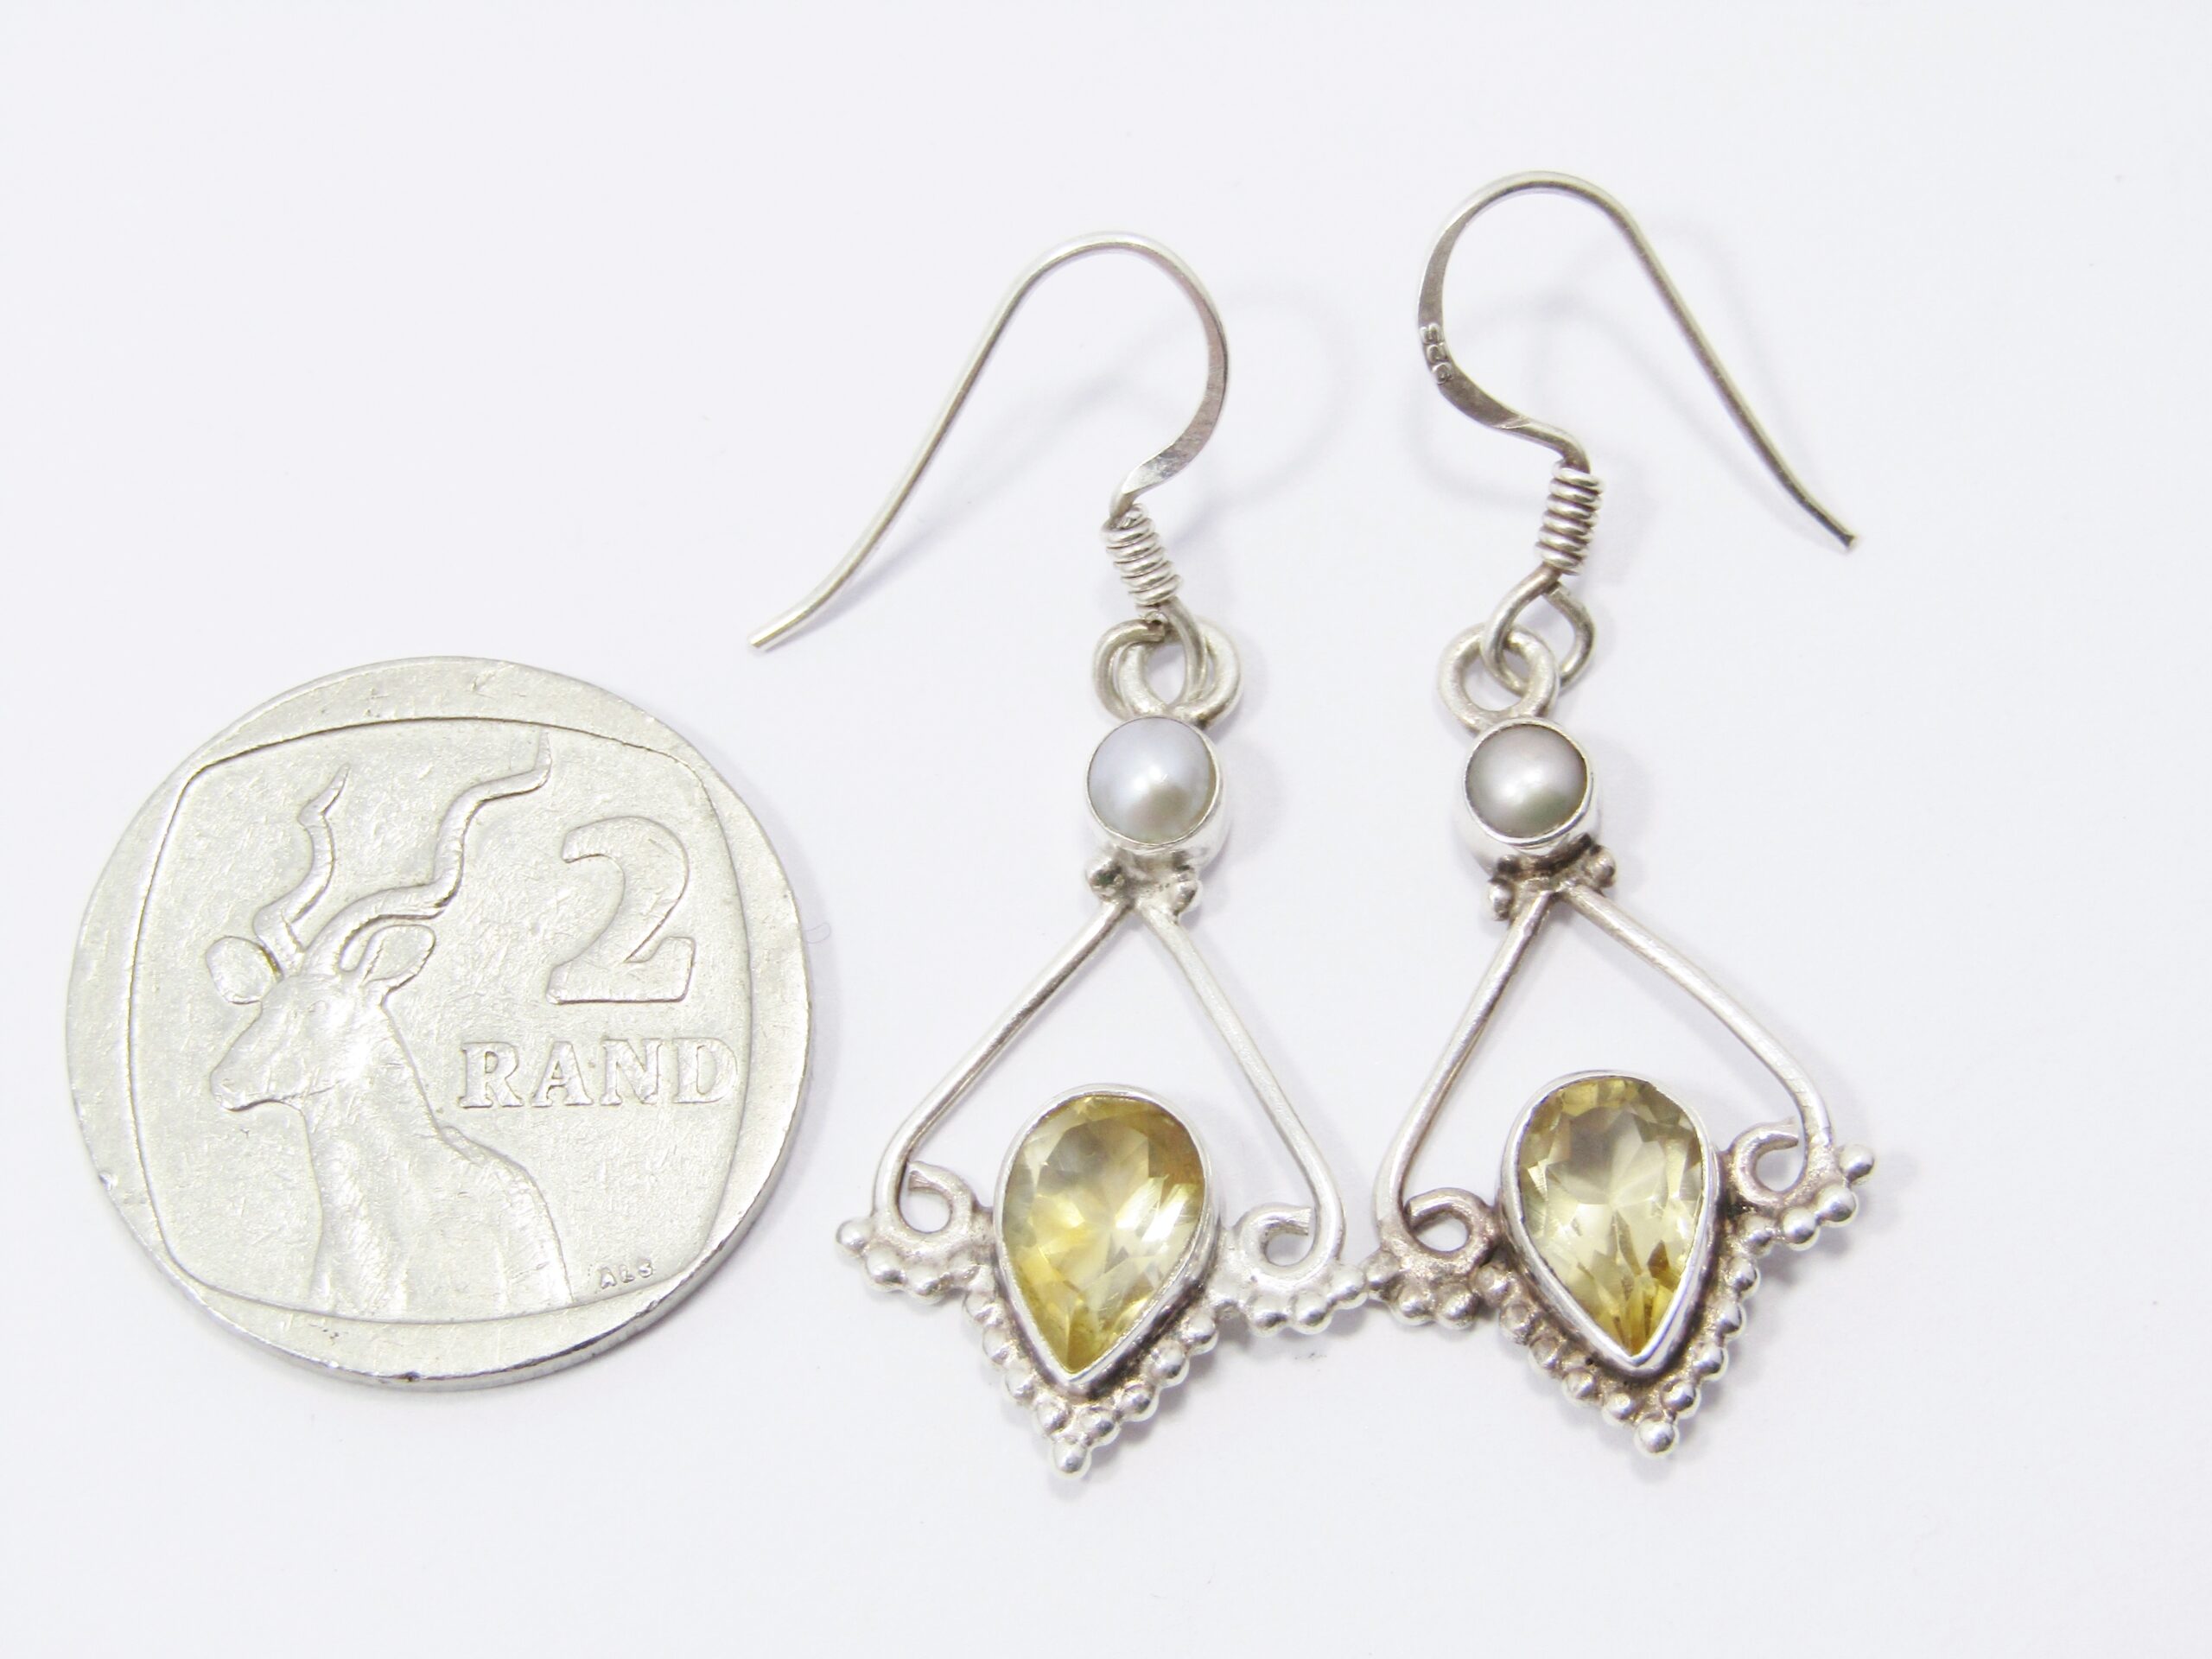 A Beautiful Pair of Pearl and Citrine Dangling Earrings in Sterling Silver.